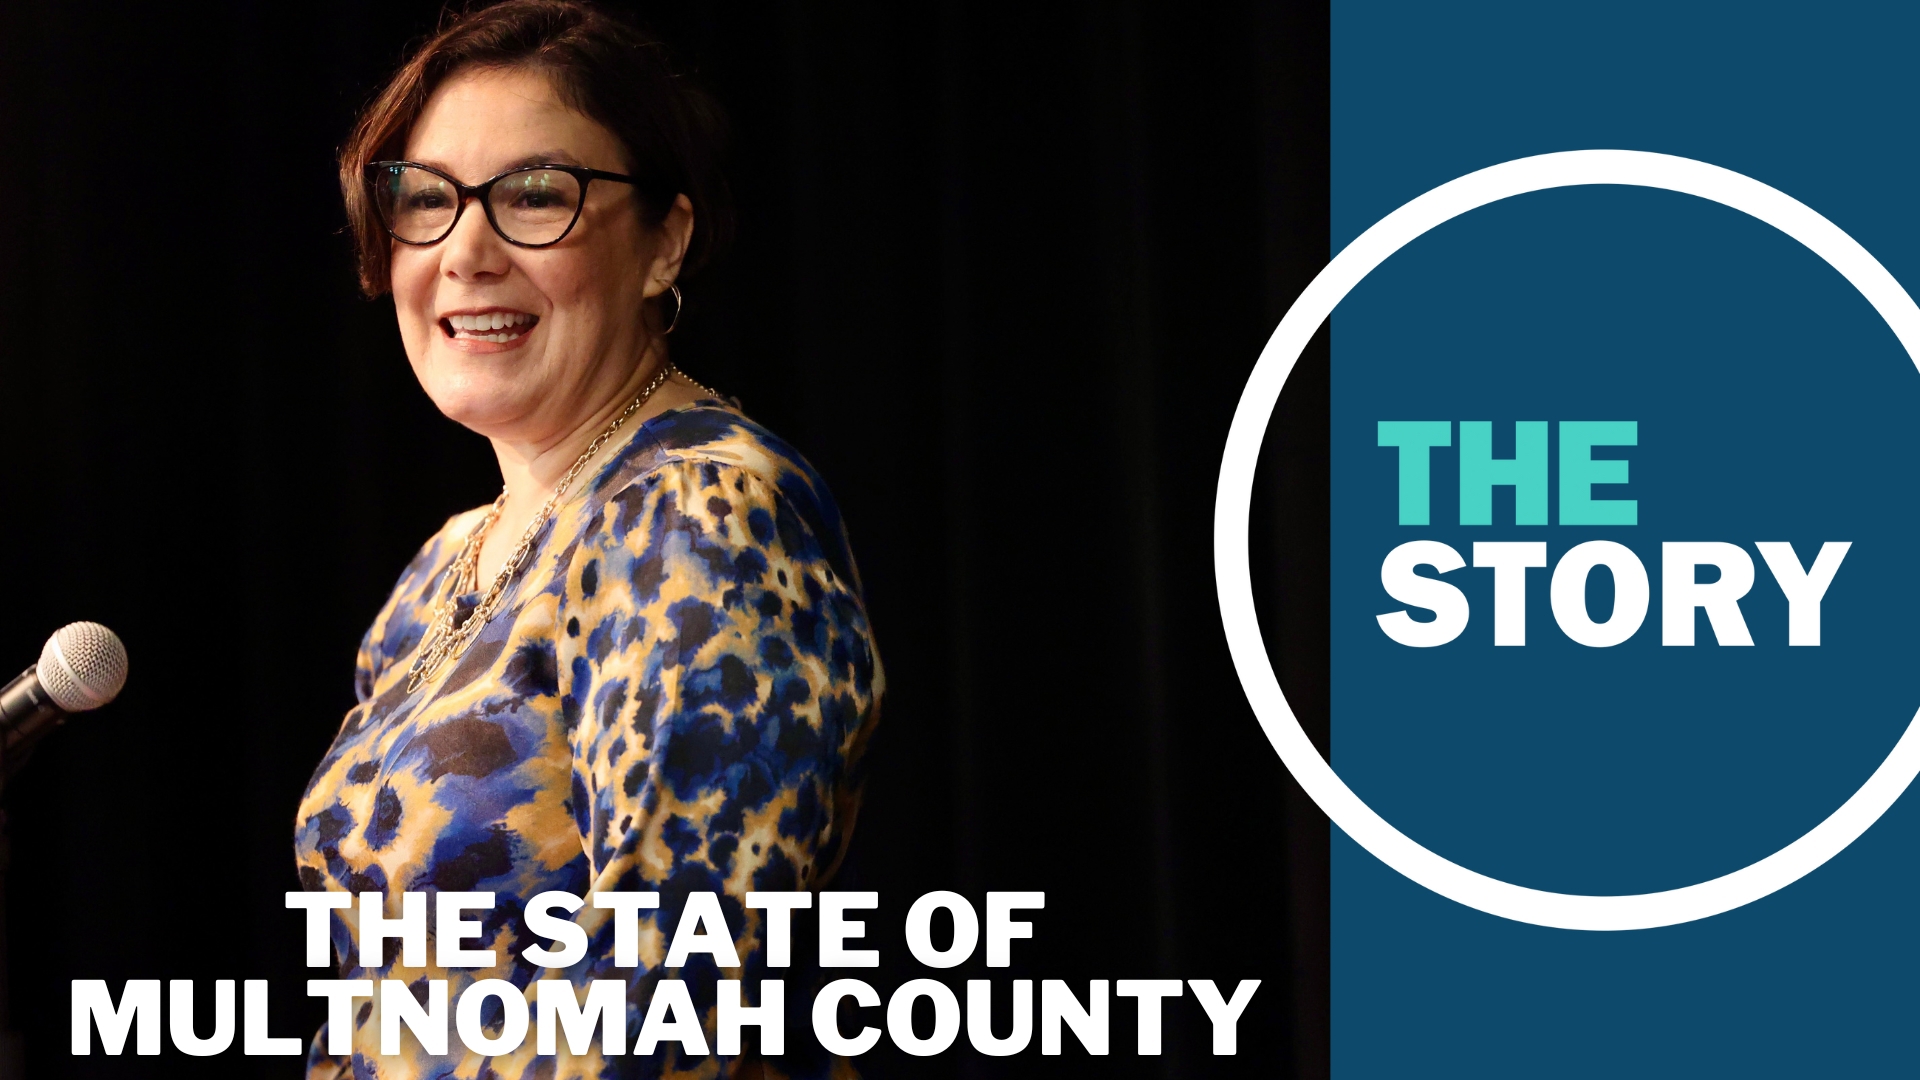 Vega Pederson delivered the annual "State of Multnomah County" address Monday, her second turn at the podium since being elected chair.